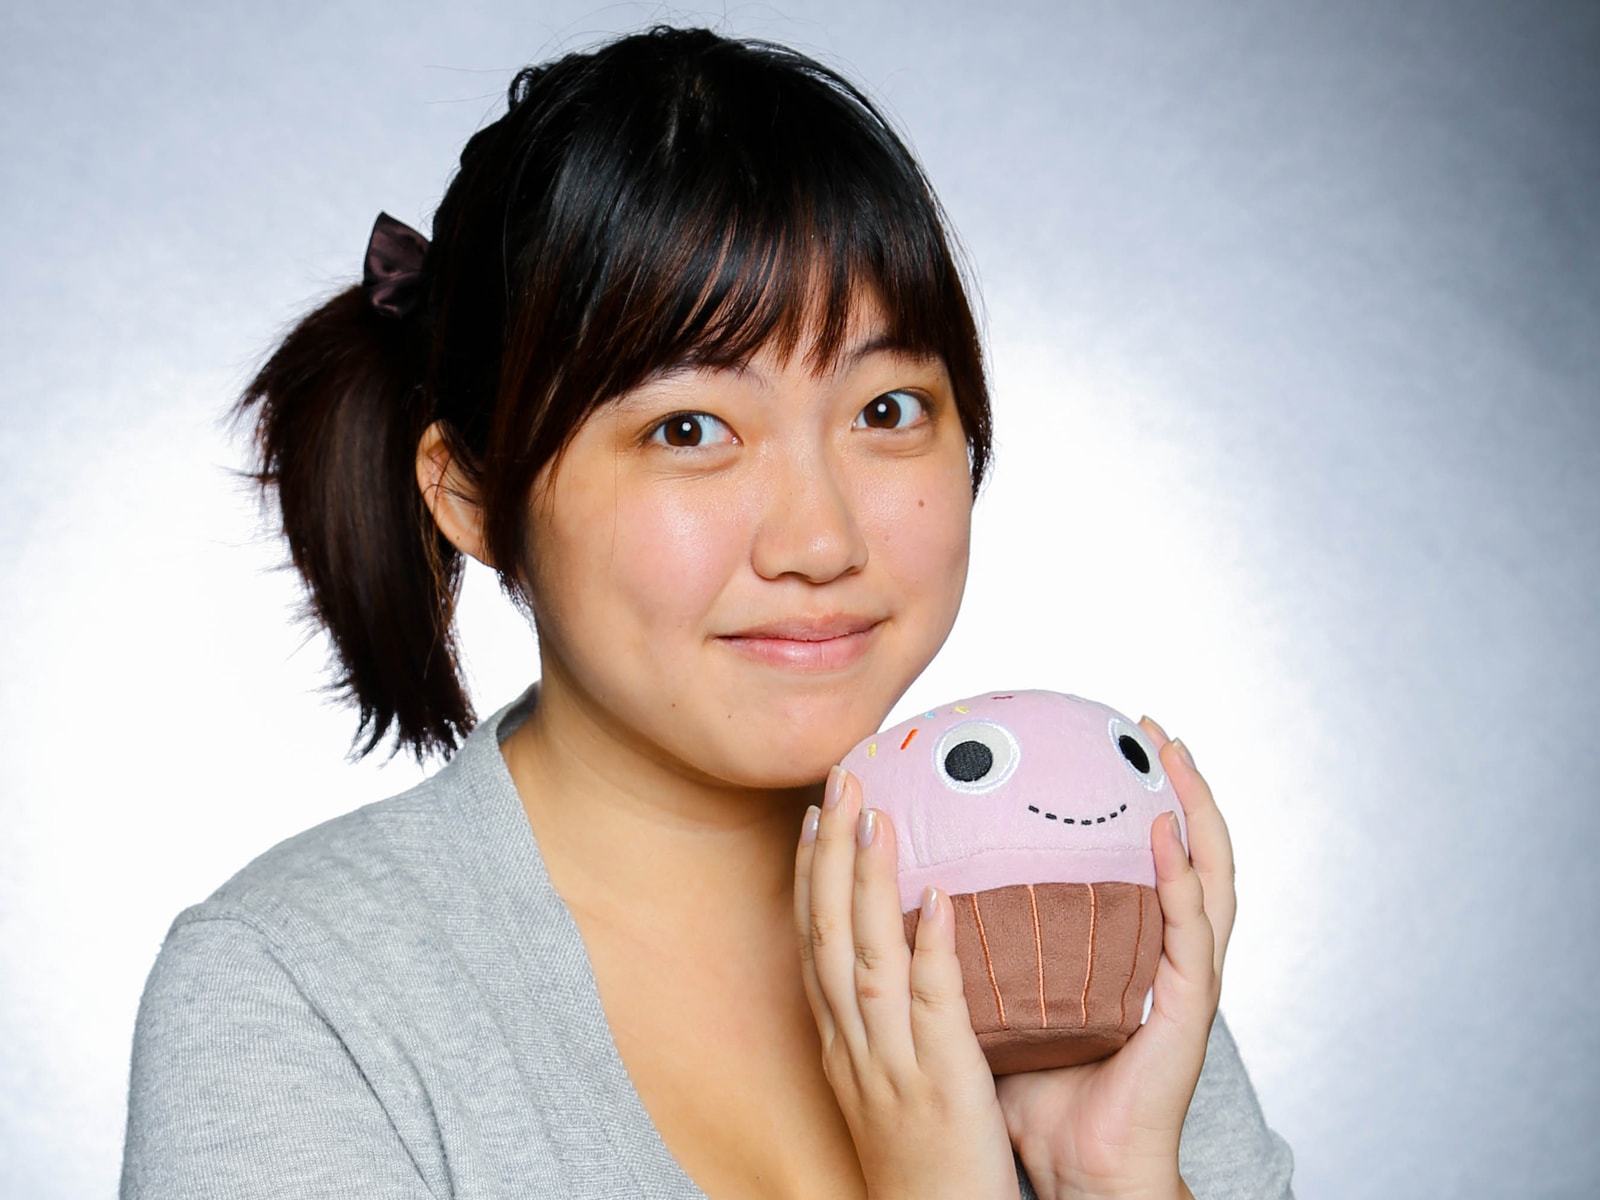 DigiPen alumna Jessica Nam posing with a cupcake-shaped plush toy